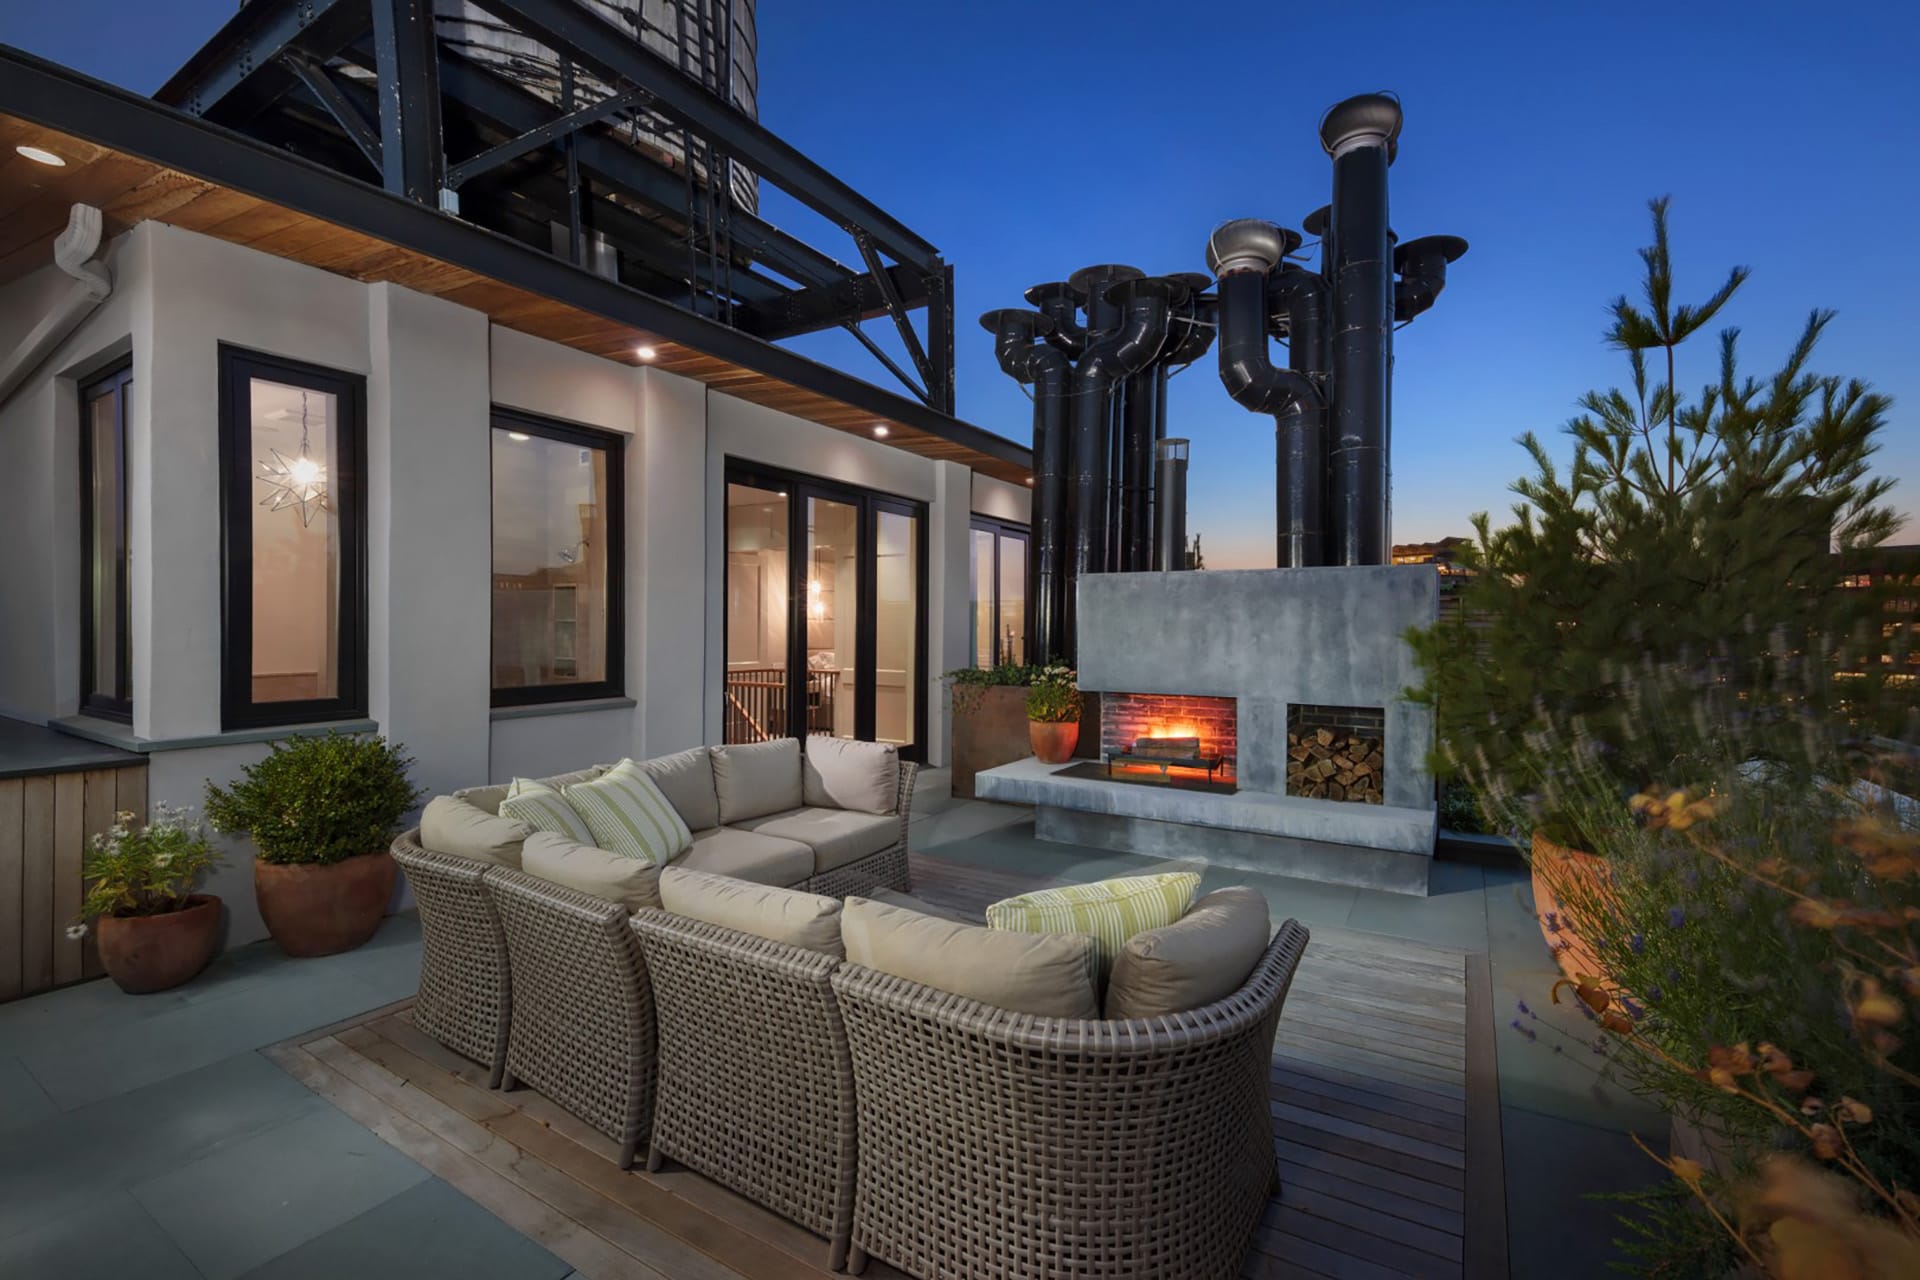 Roof deck with an outdoor seating area, kitchen, and wood-burning fireplace at twilight.